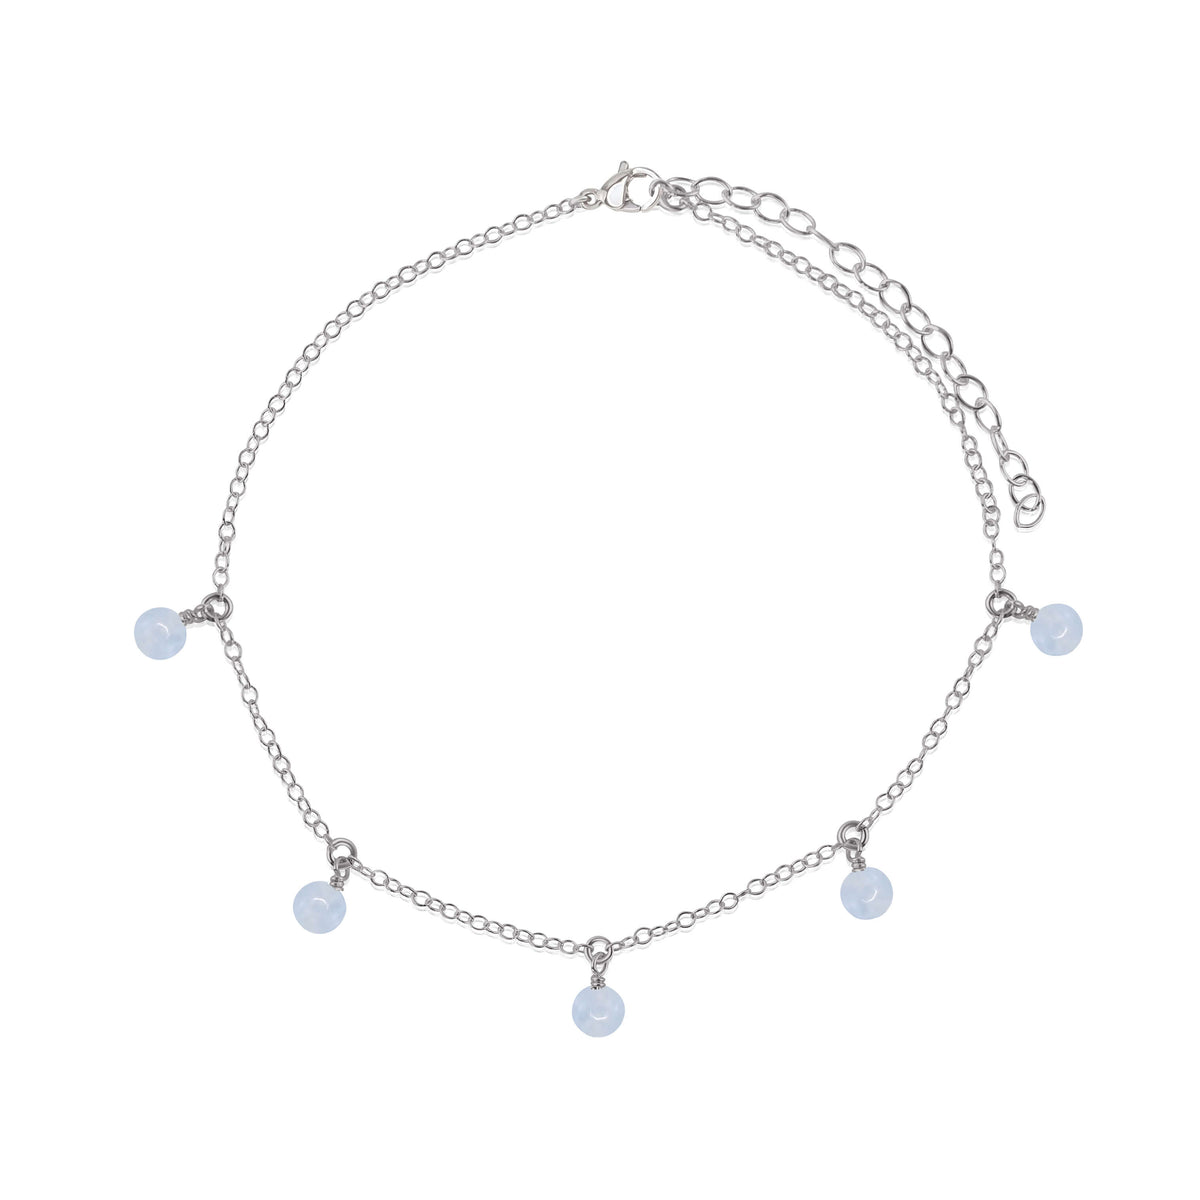 Bead Drop Anklet - Blue Lace Agate - Stainless Steel - Luna Tide Handmade Jewellery